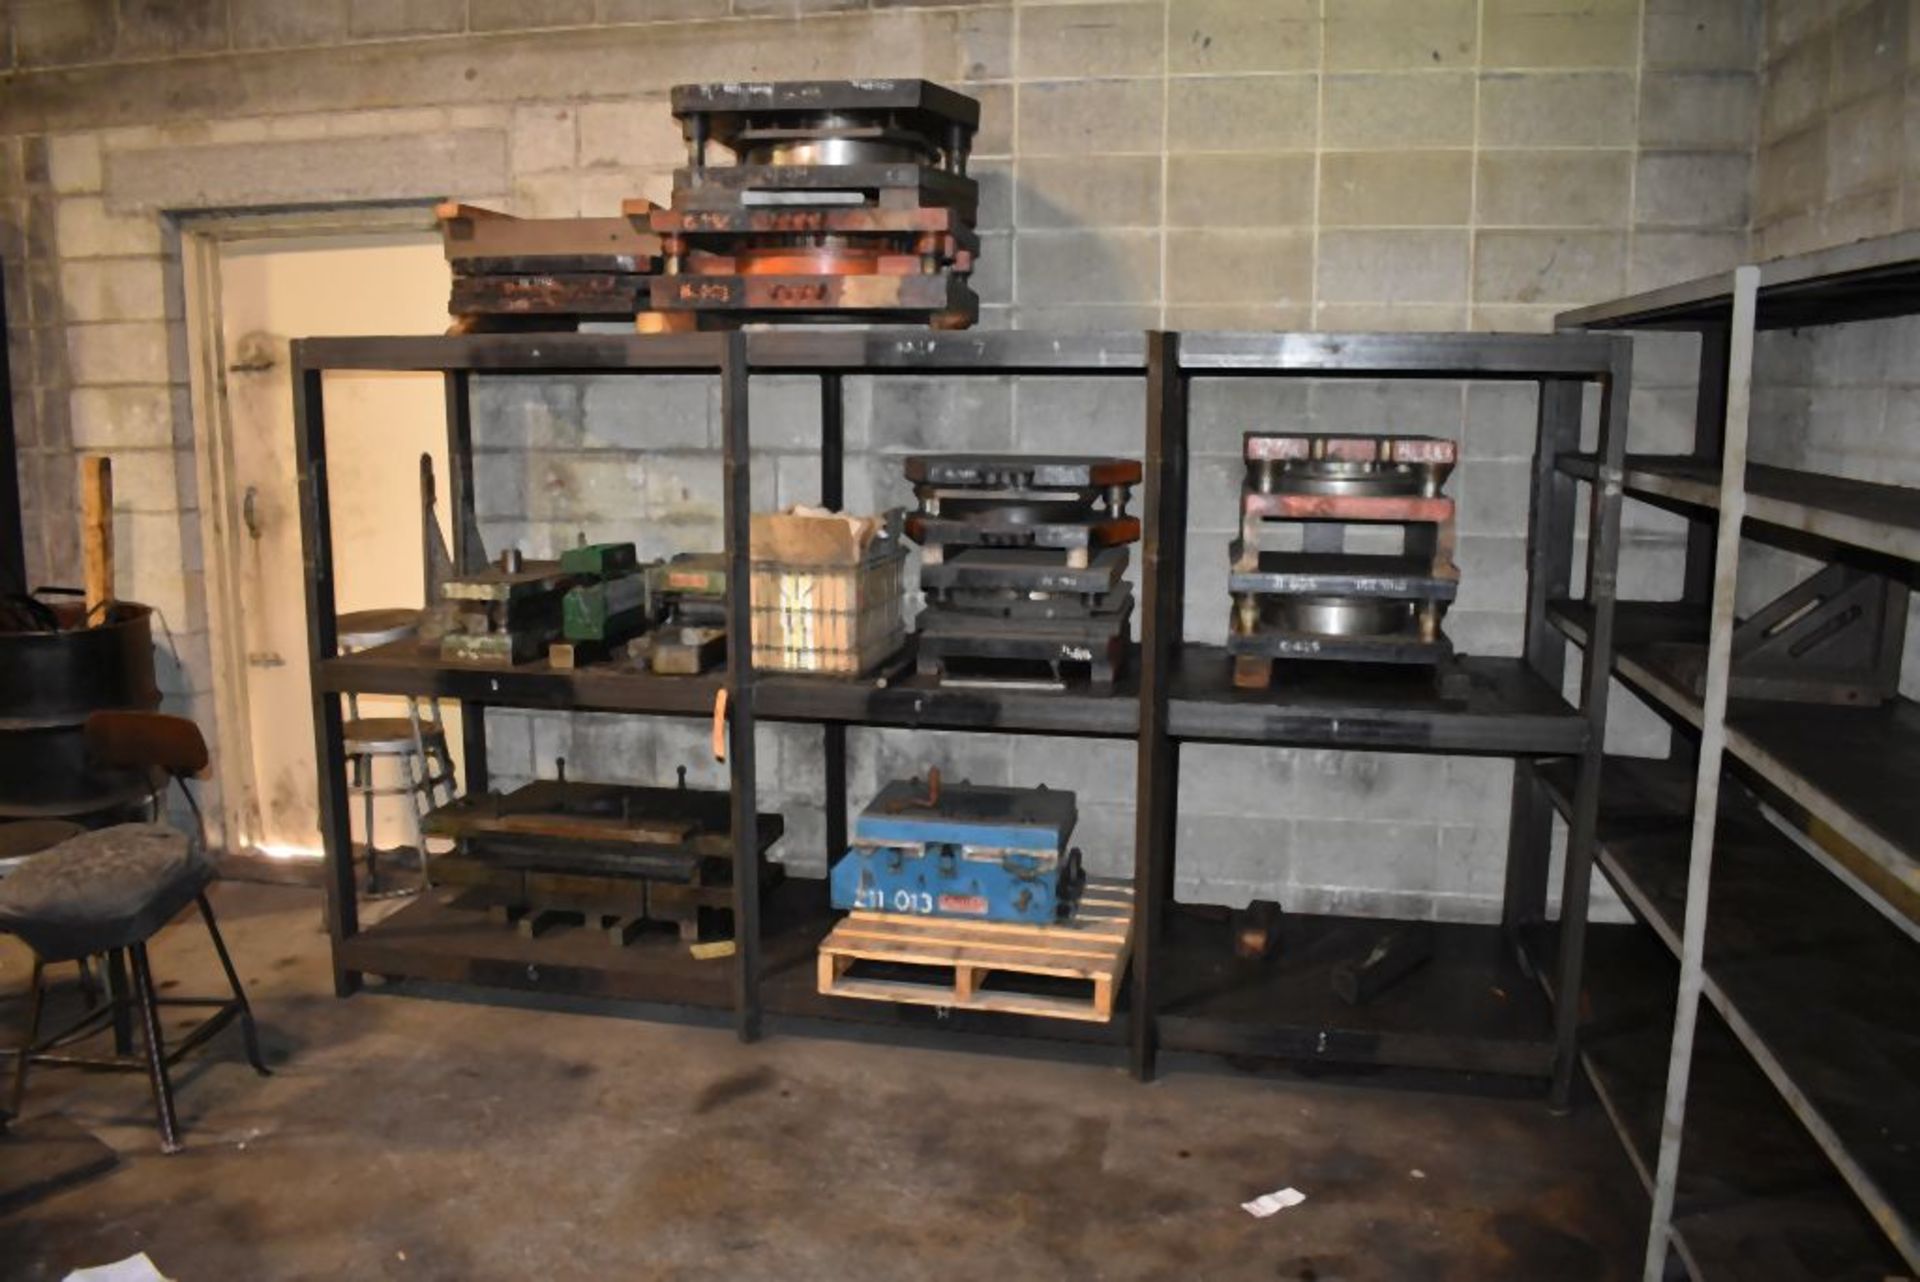 HEAVY DUTY WELDED STEEL SHELVING UNIT, THREE TIER, INCLUDES CONTENTS, 10'2"L x 32"D x 68"H